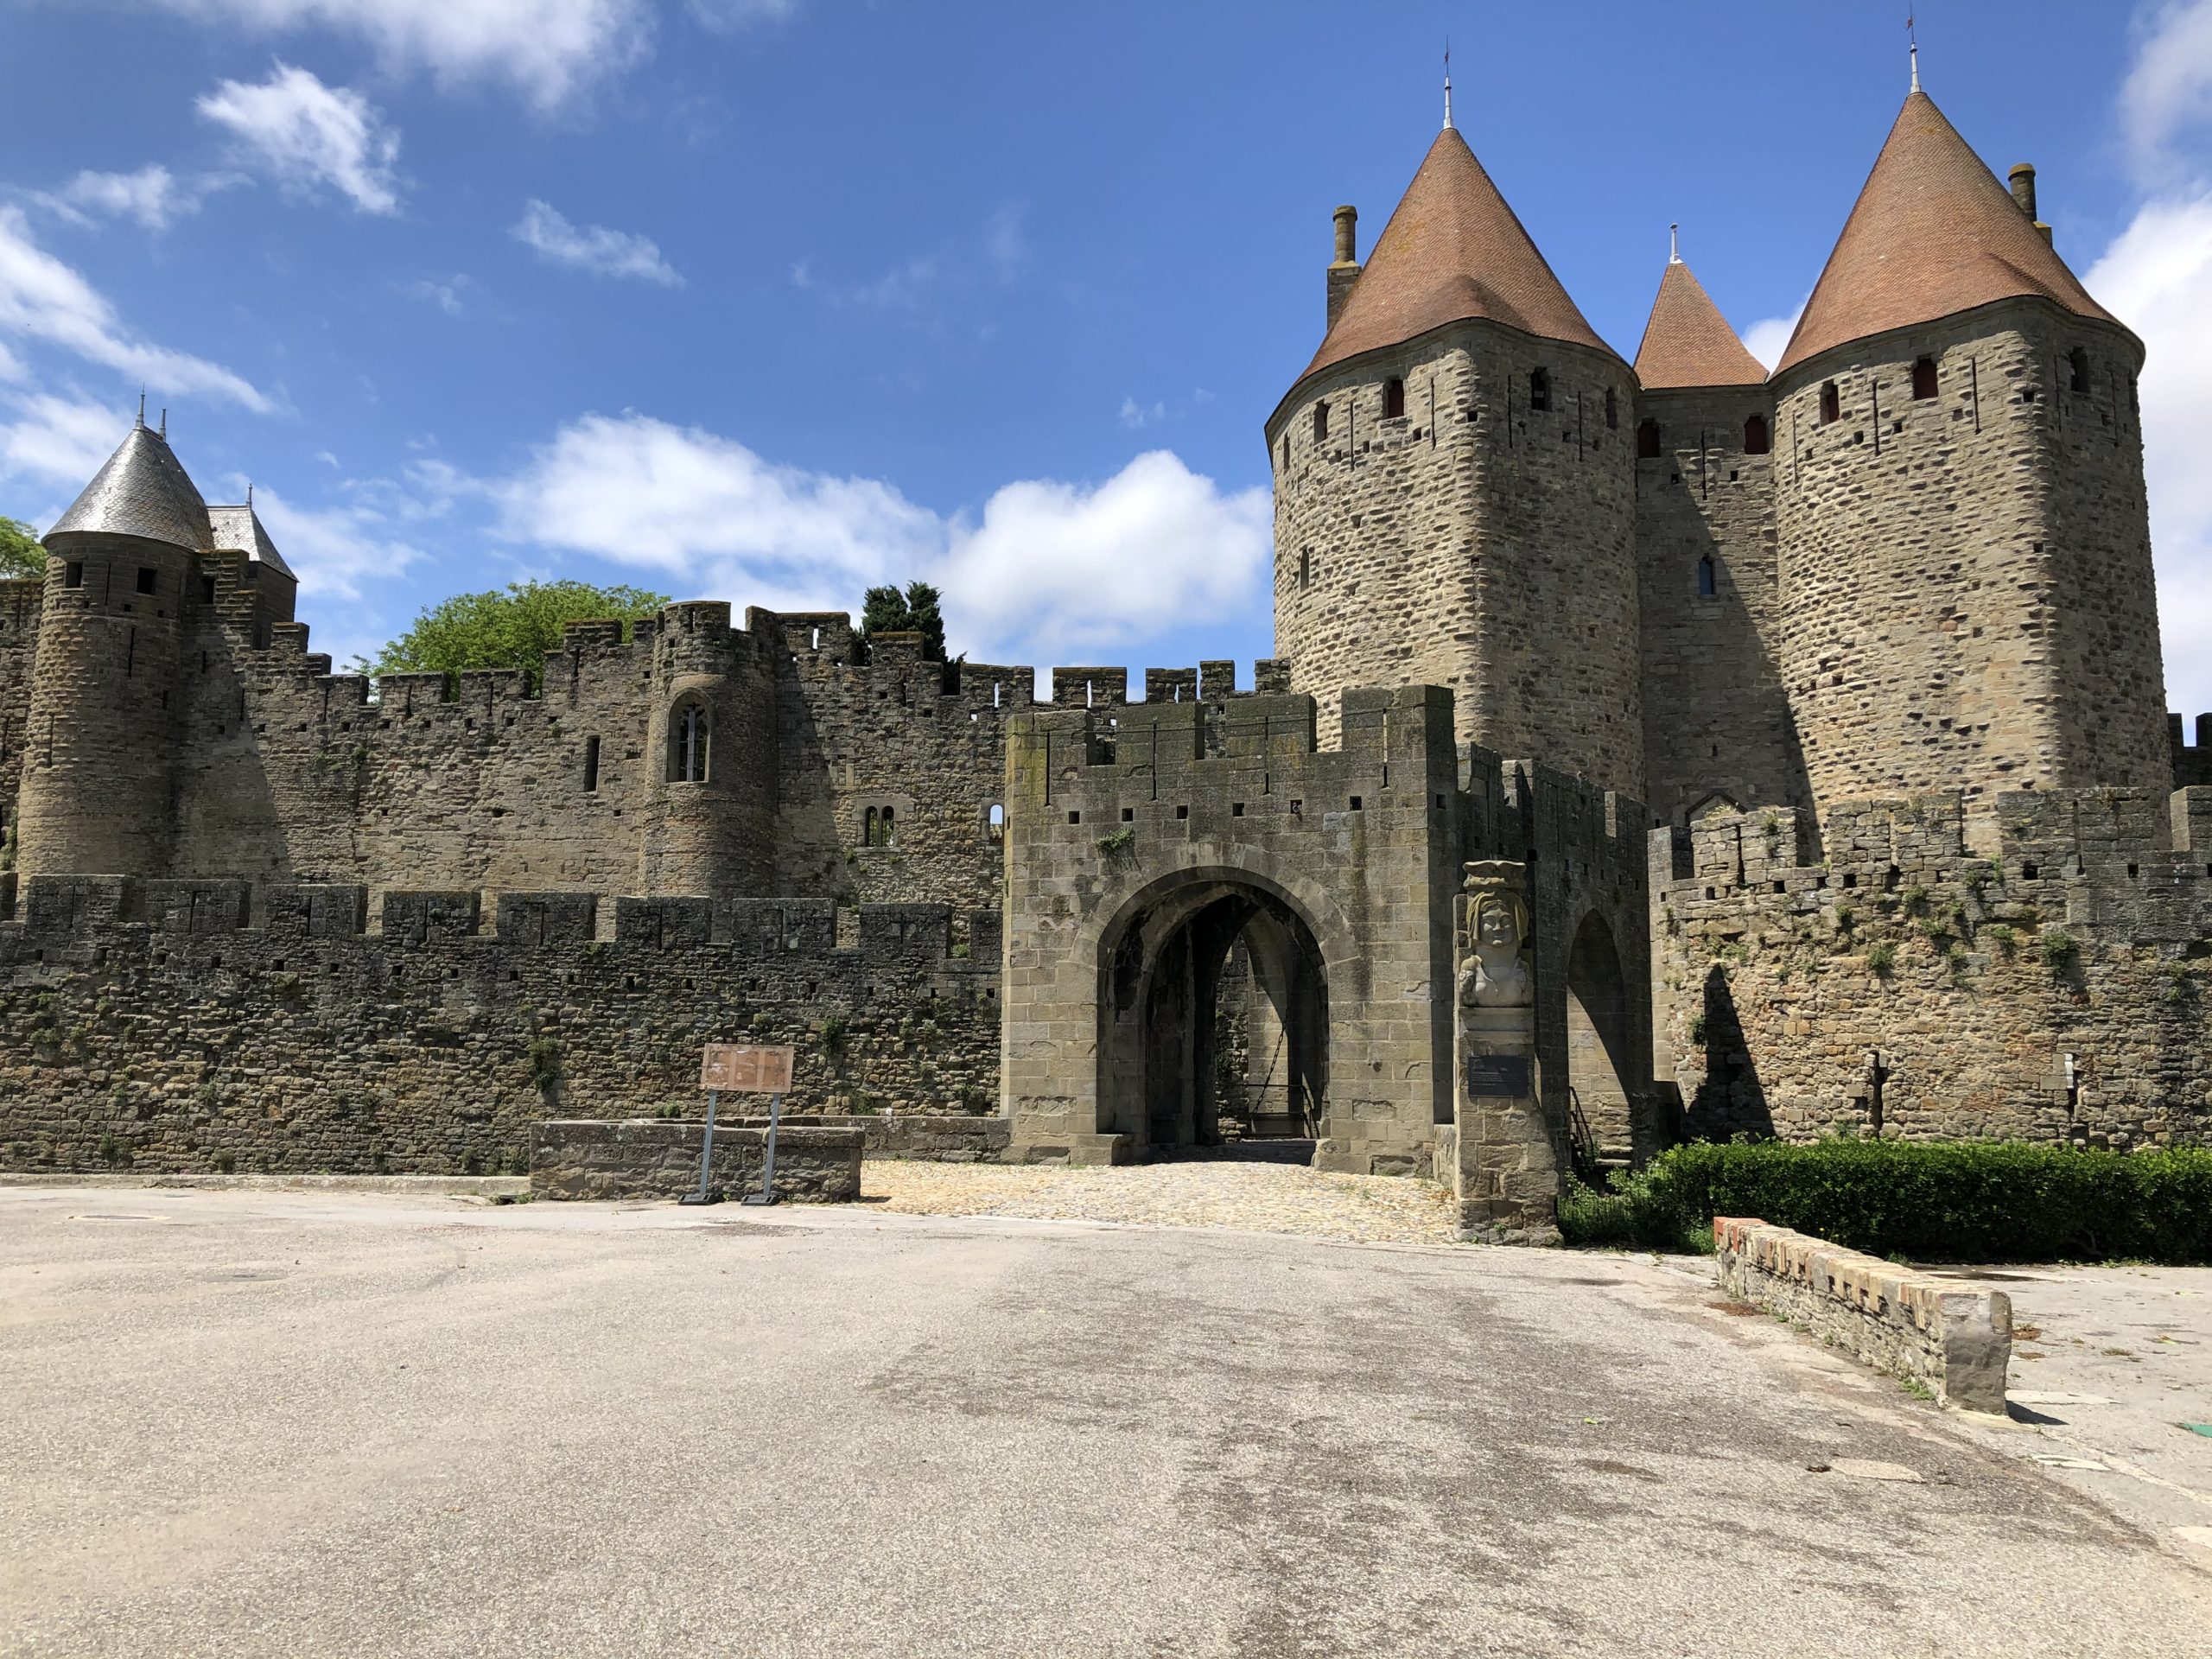 Carcassonne's walled city the Narbonne Gate